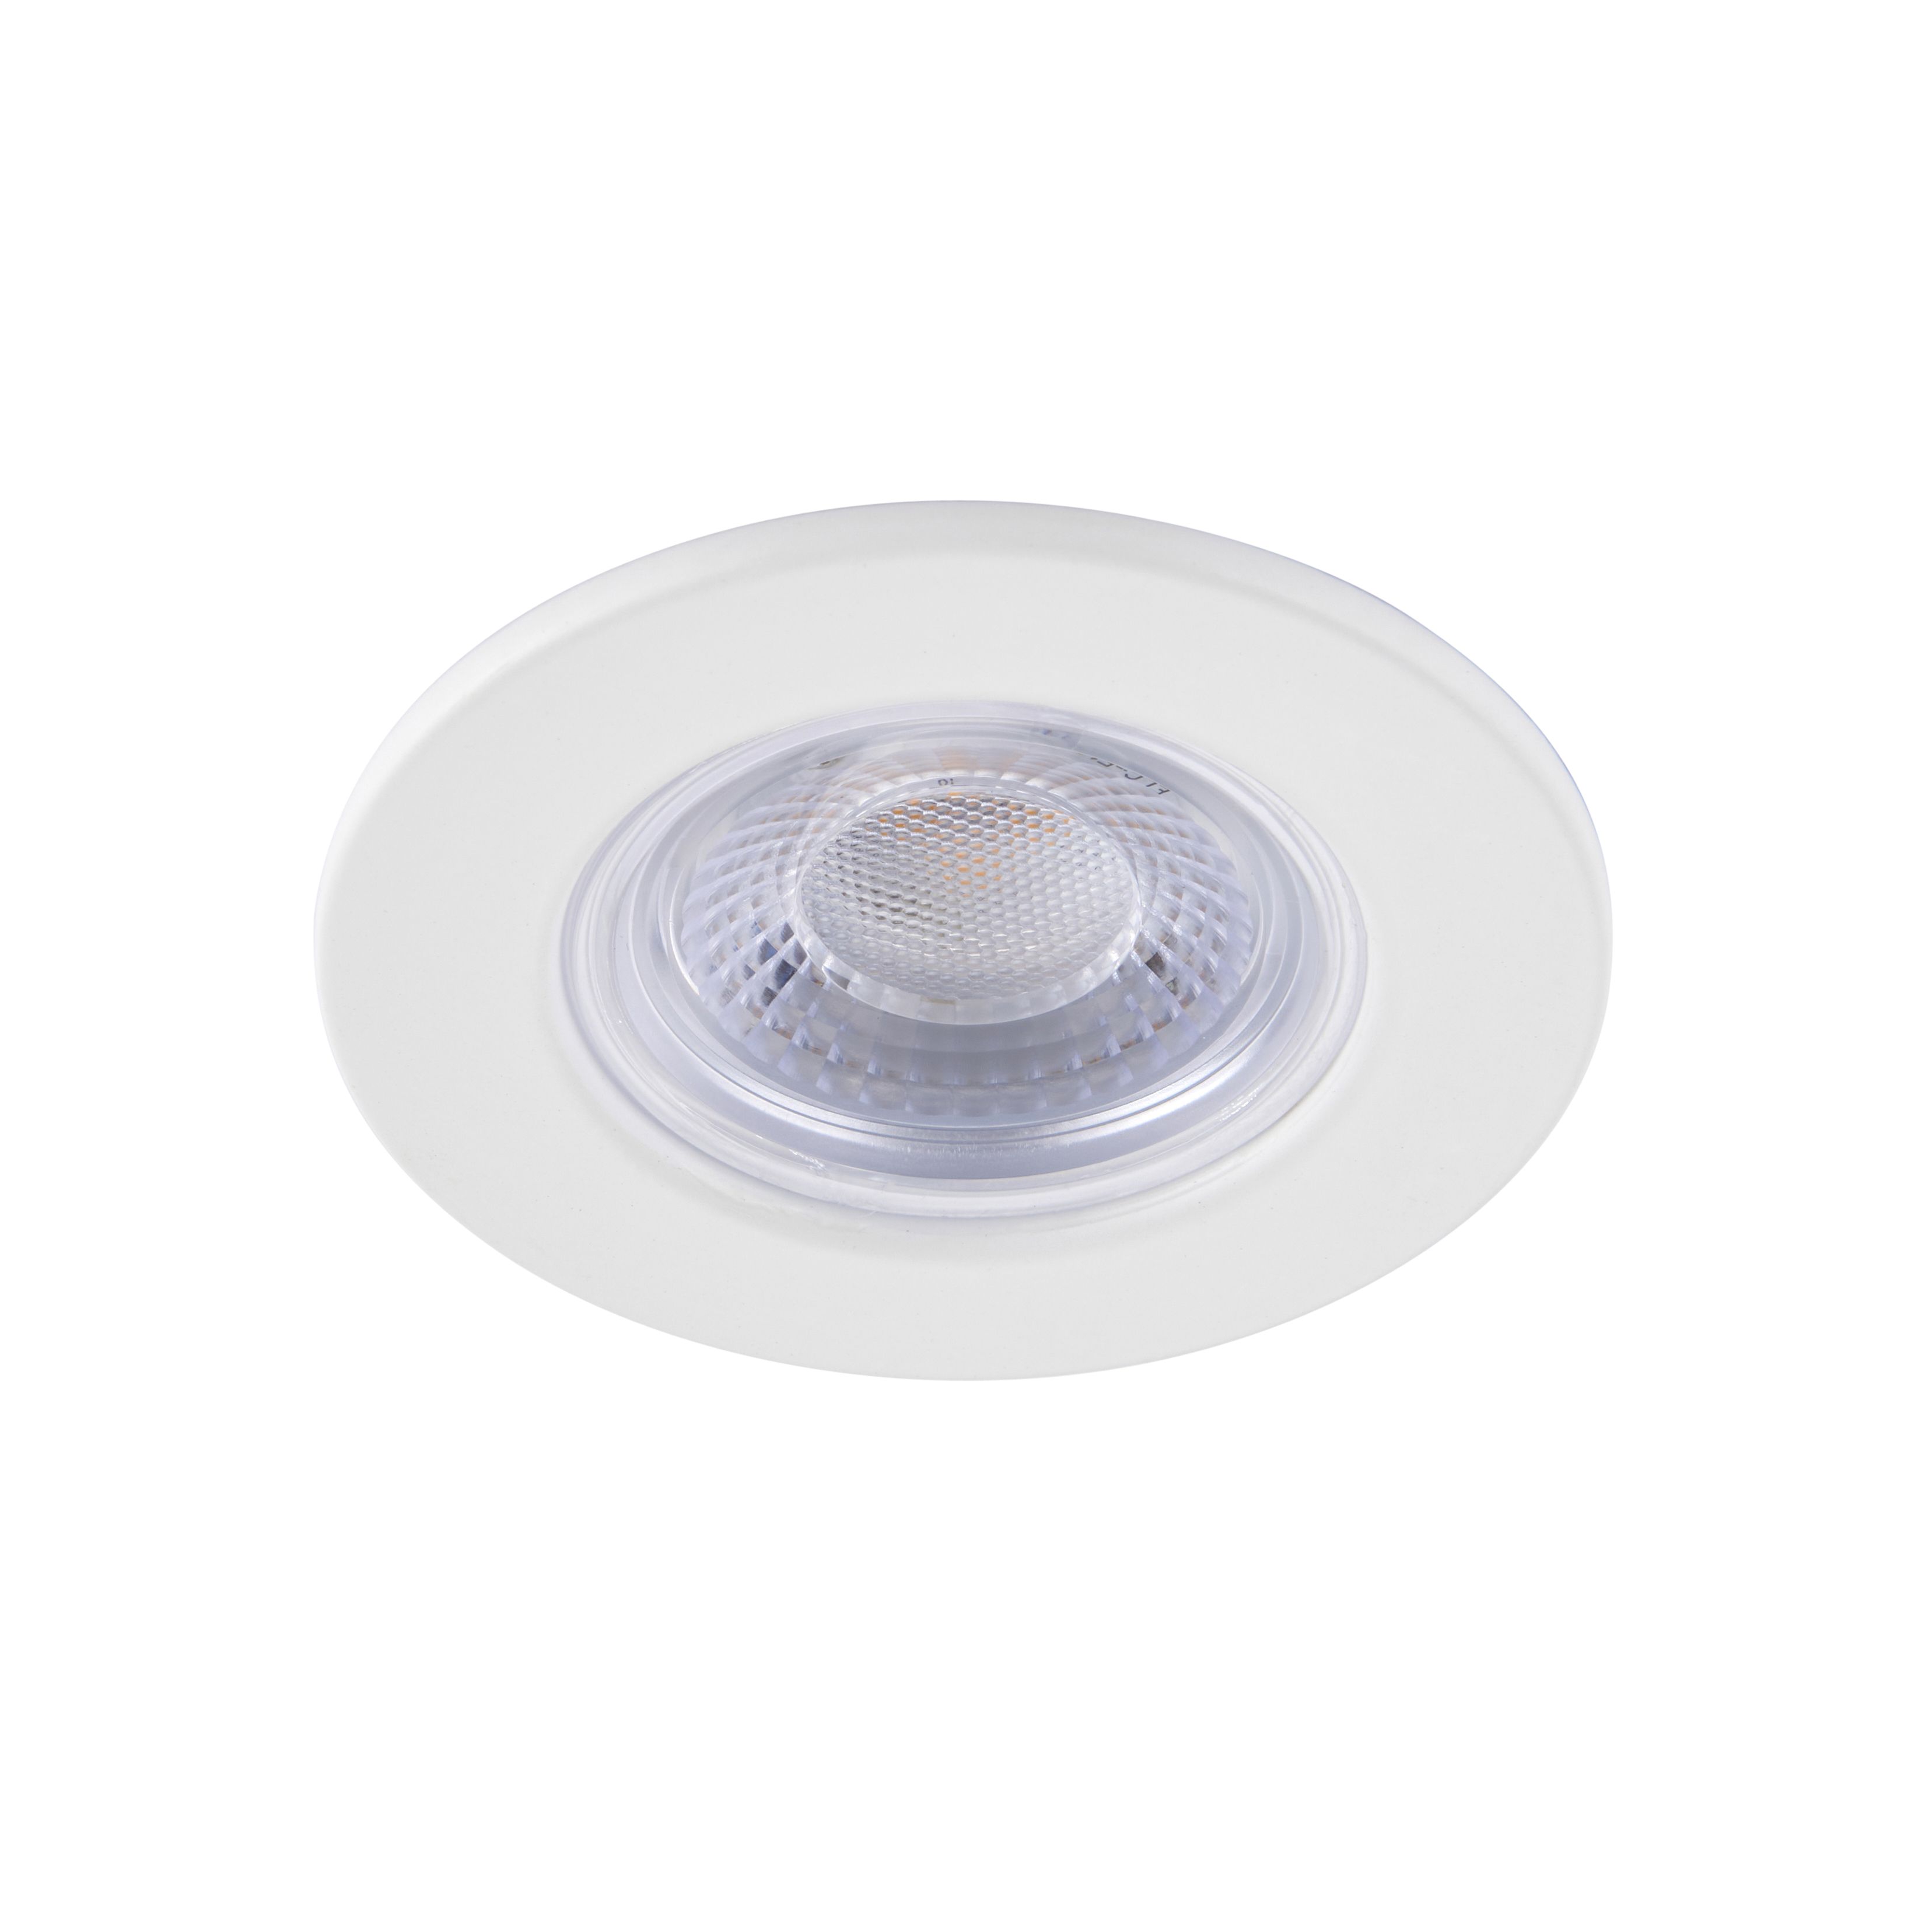 GuardECO White Non-adjustable LED Warm white Downlight 6W IP65, Pack of 10